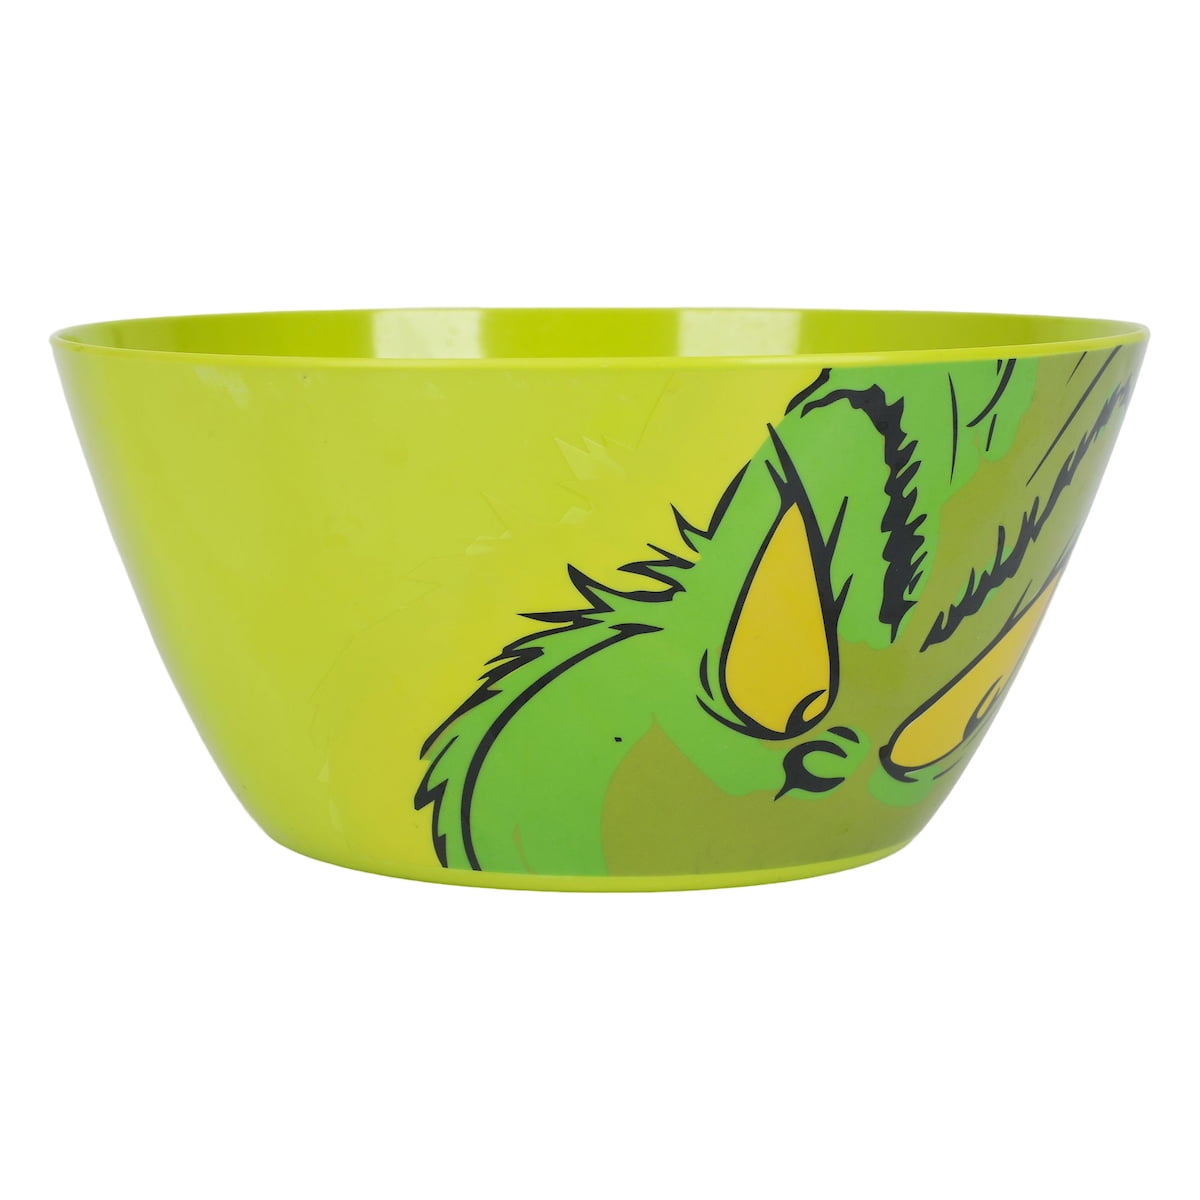 The Grinch Character Face 10 Serving Bowl